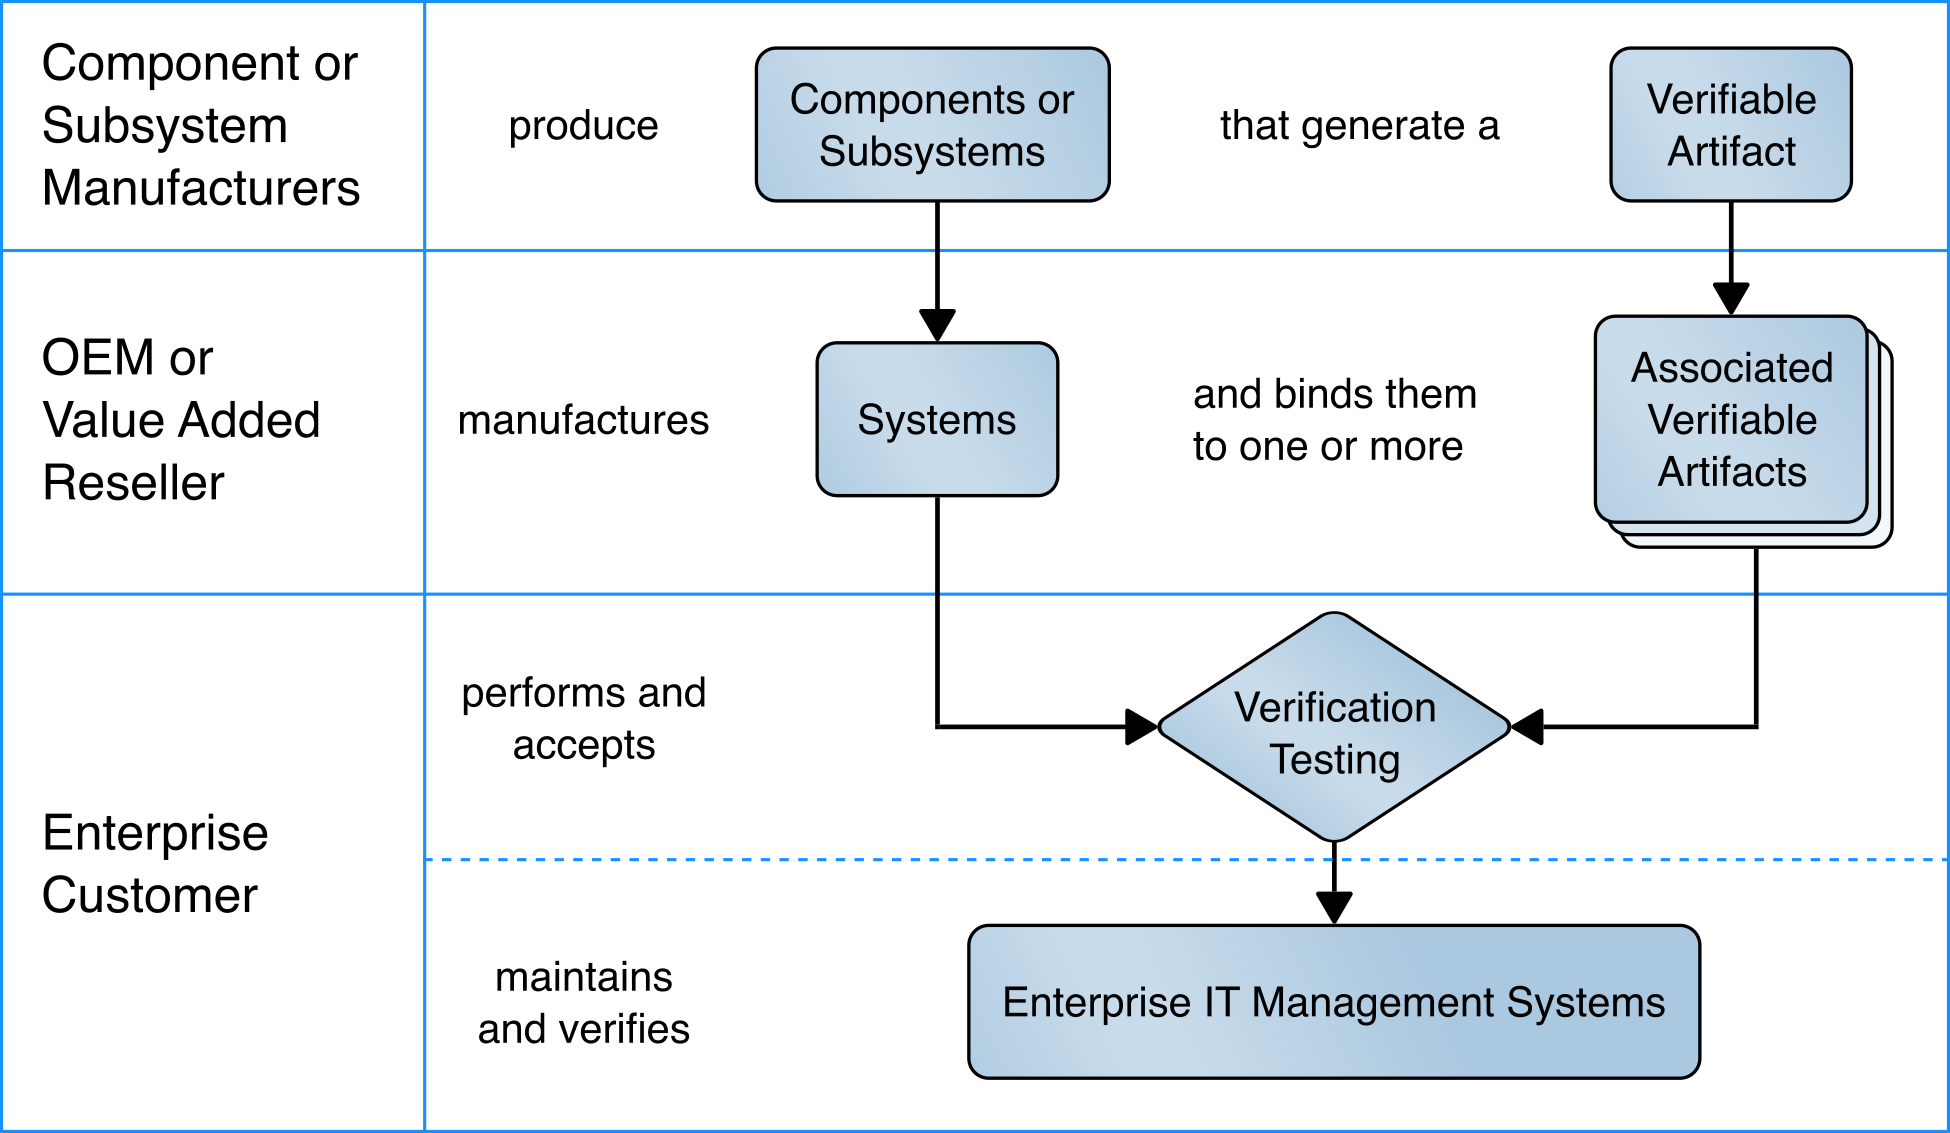 This figure depicts a notional logical architecture for incorporating C-SCRM technologies into an organization. It shows the logical flows from the component or system manufacturers to OEMs and VARs, and from OEMs and VARs to enterprise customers.